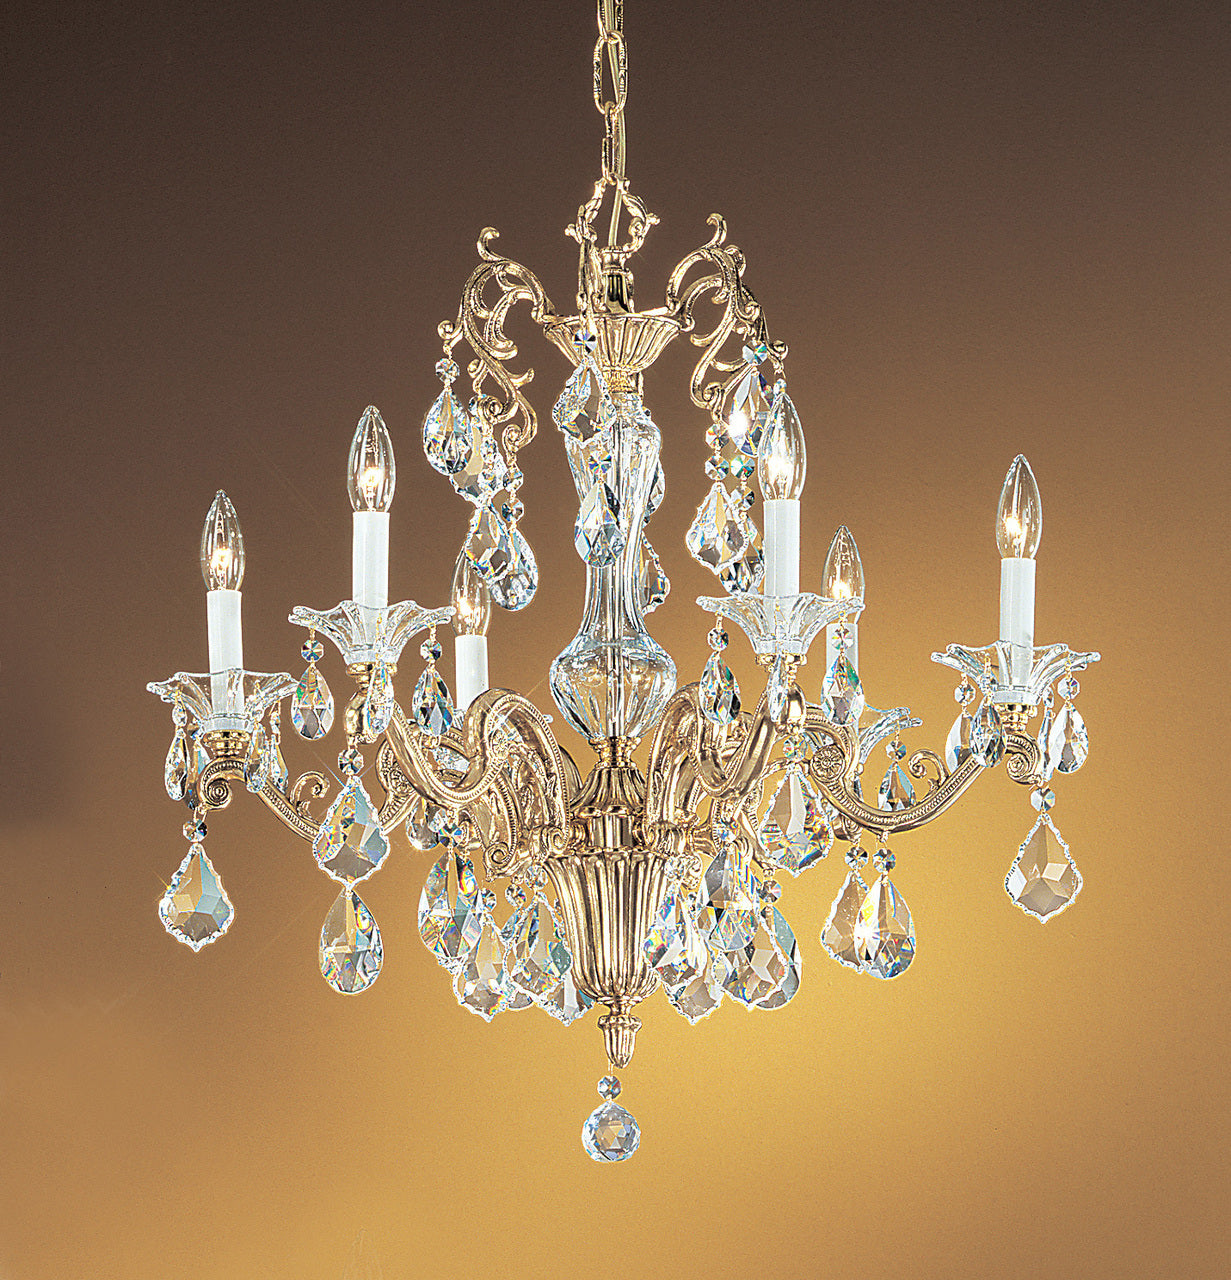 Classic Lighting 57106 BBK SC Via Firenze Crystal Chandelier in Bronze/Black Patina (Imported from Spain)